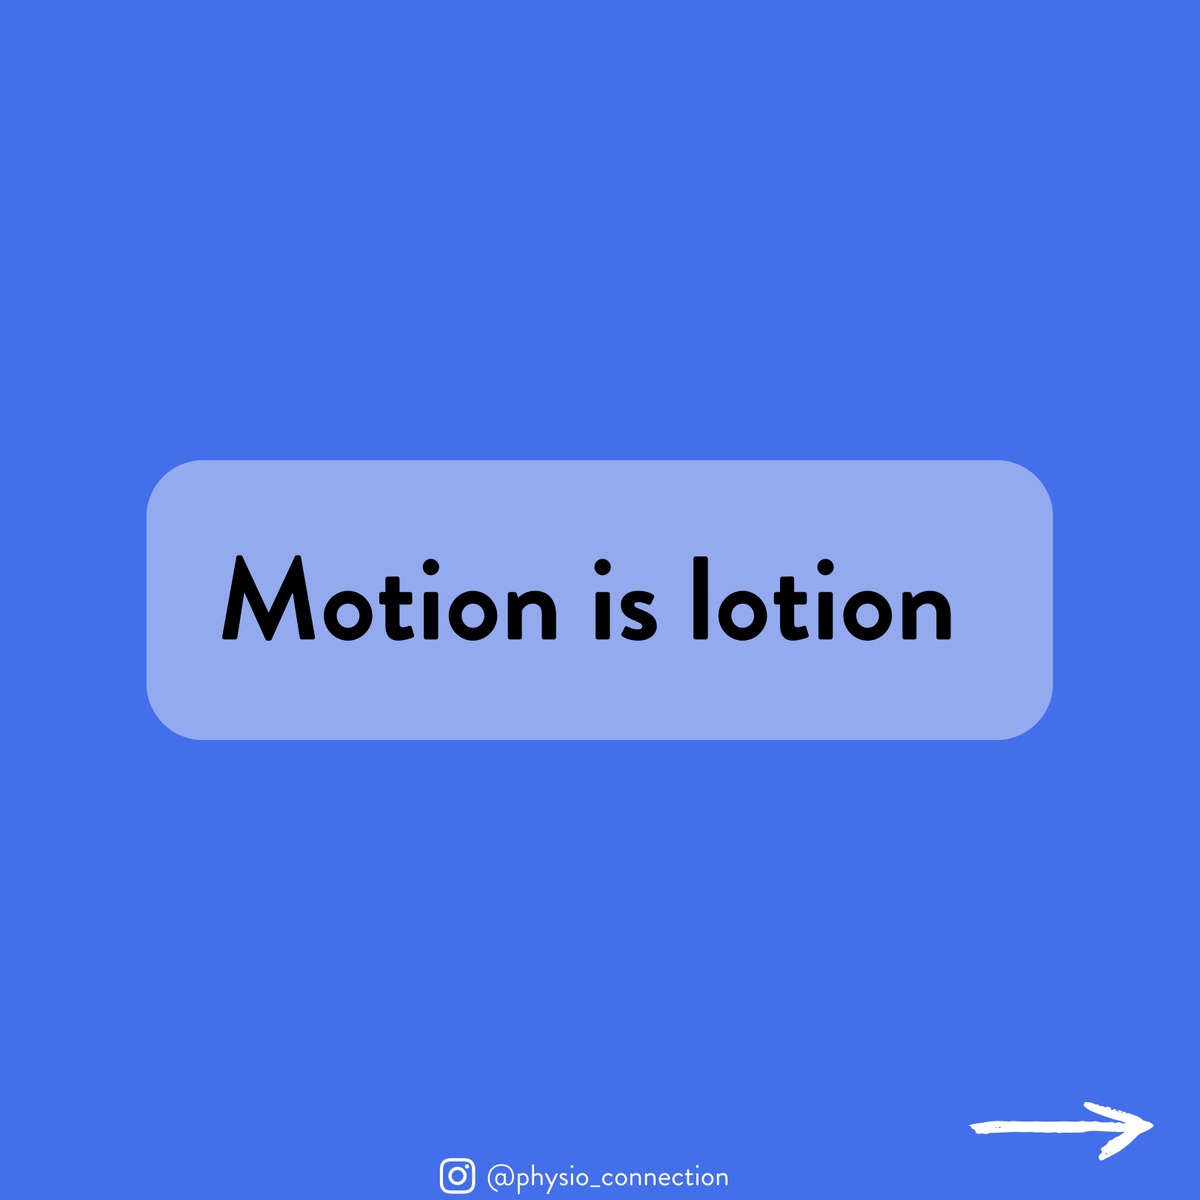 Motion is lotion!